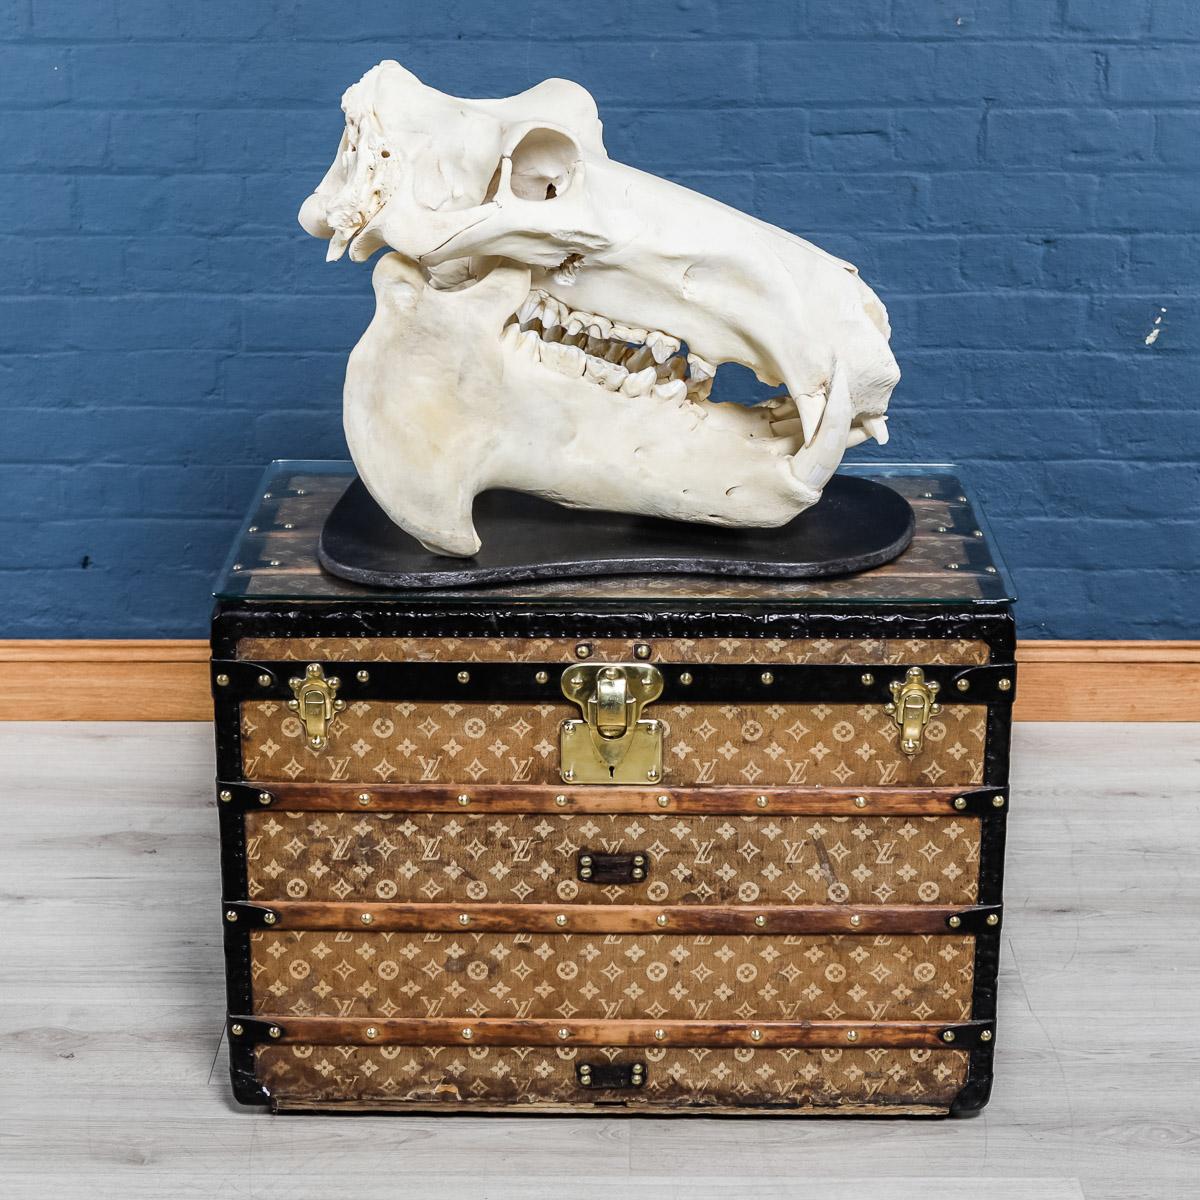 A beautiful late 20th century hippopotamus skull mounted on a wooden shield in exceptionally good order, complete with all tusks/teeth. Great interior design conversation piece.

The hippopotamus is considered to be very aggressive and has